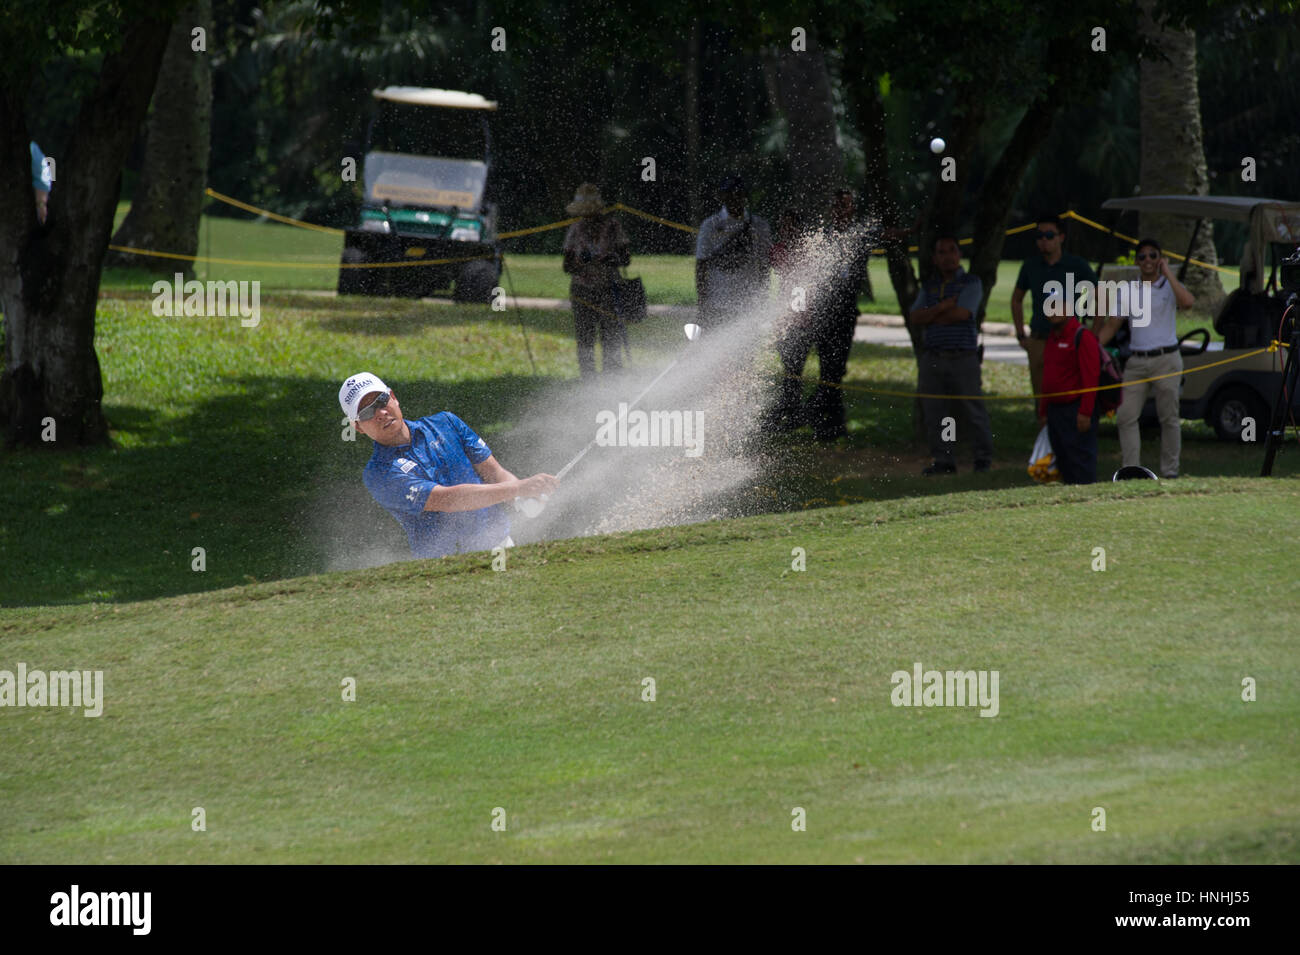 Kuala Lumpur, Malaysia. 12th Feb, 2017 Maybank Golf Championship, European Tour, Fabrizion Zanotti the eventual winner, chips out of the bunker on the 8th hole during the final round at the Maybank Championship at the Saujana Golf & Country Club. Credit: Flashspix/Alamy Live News Stock Photo